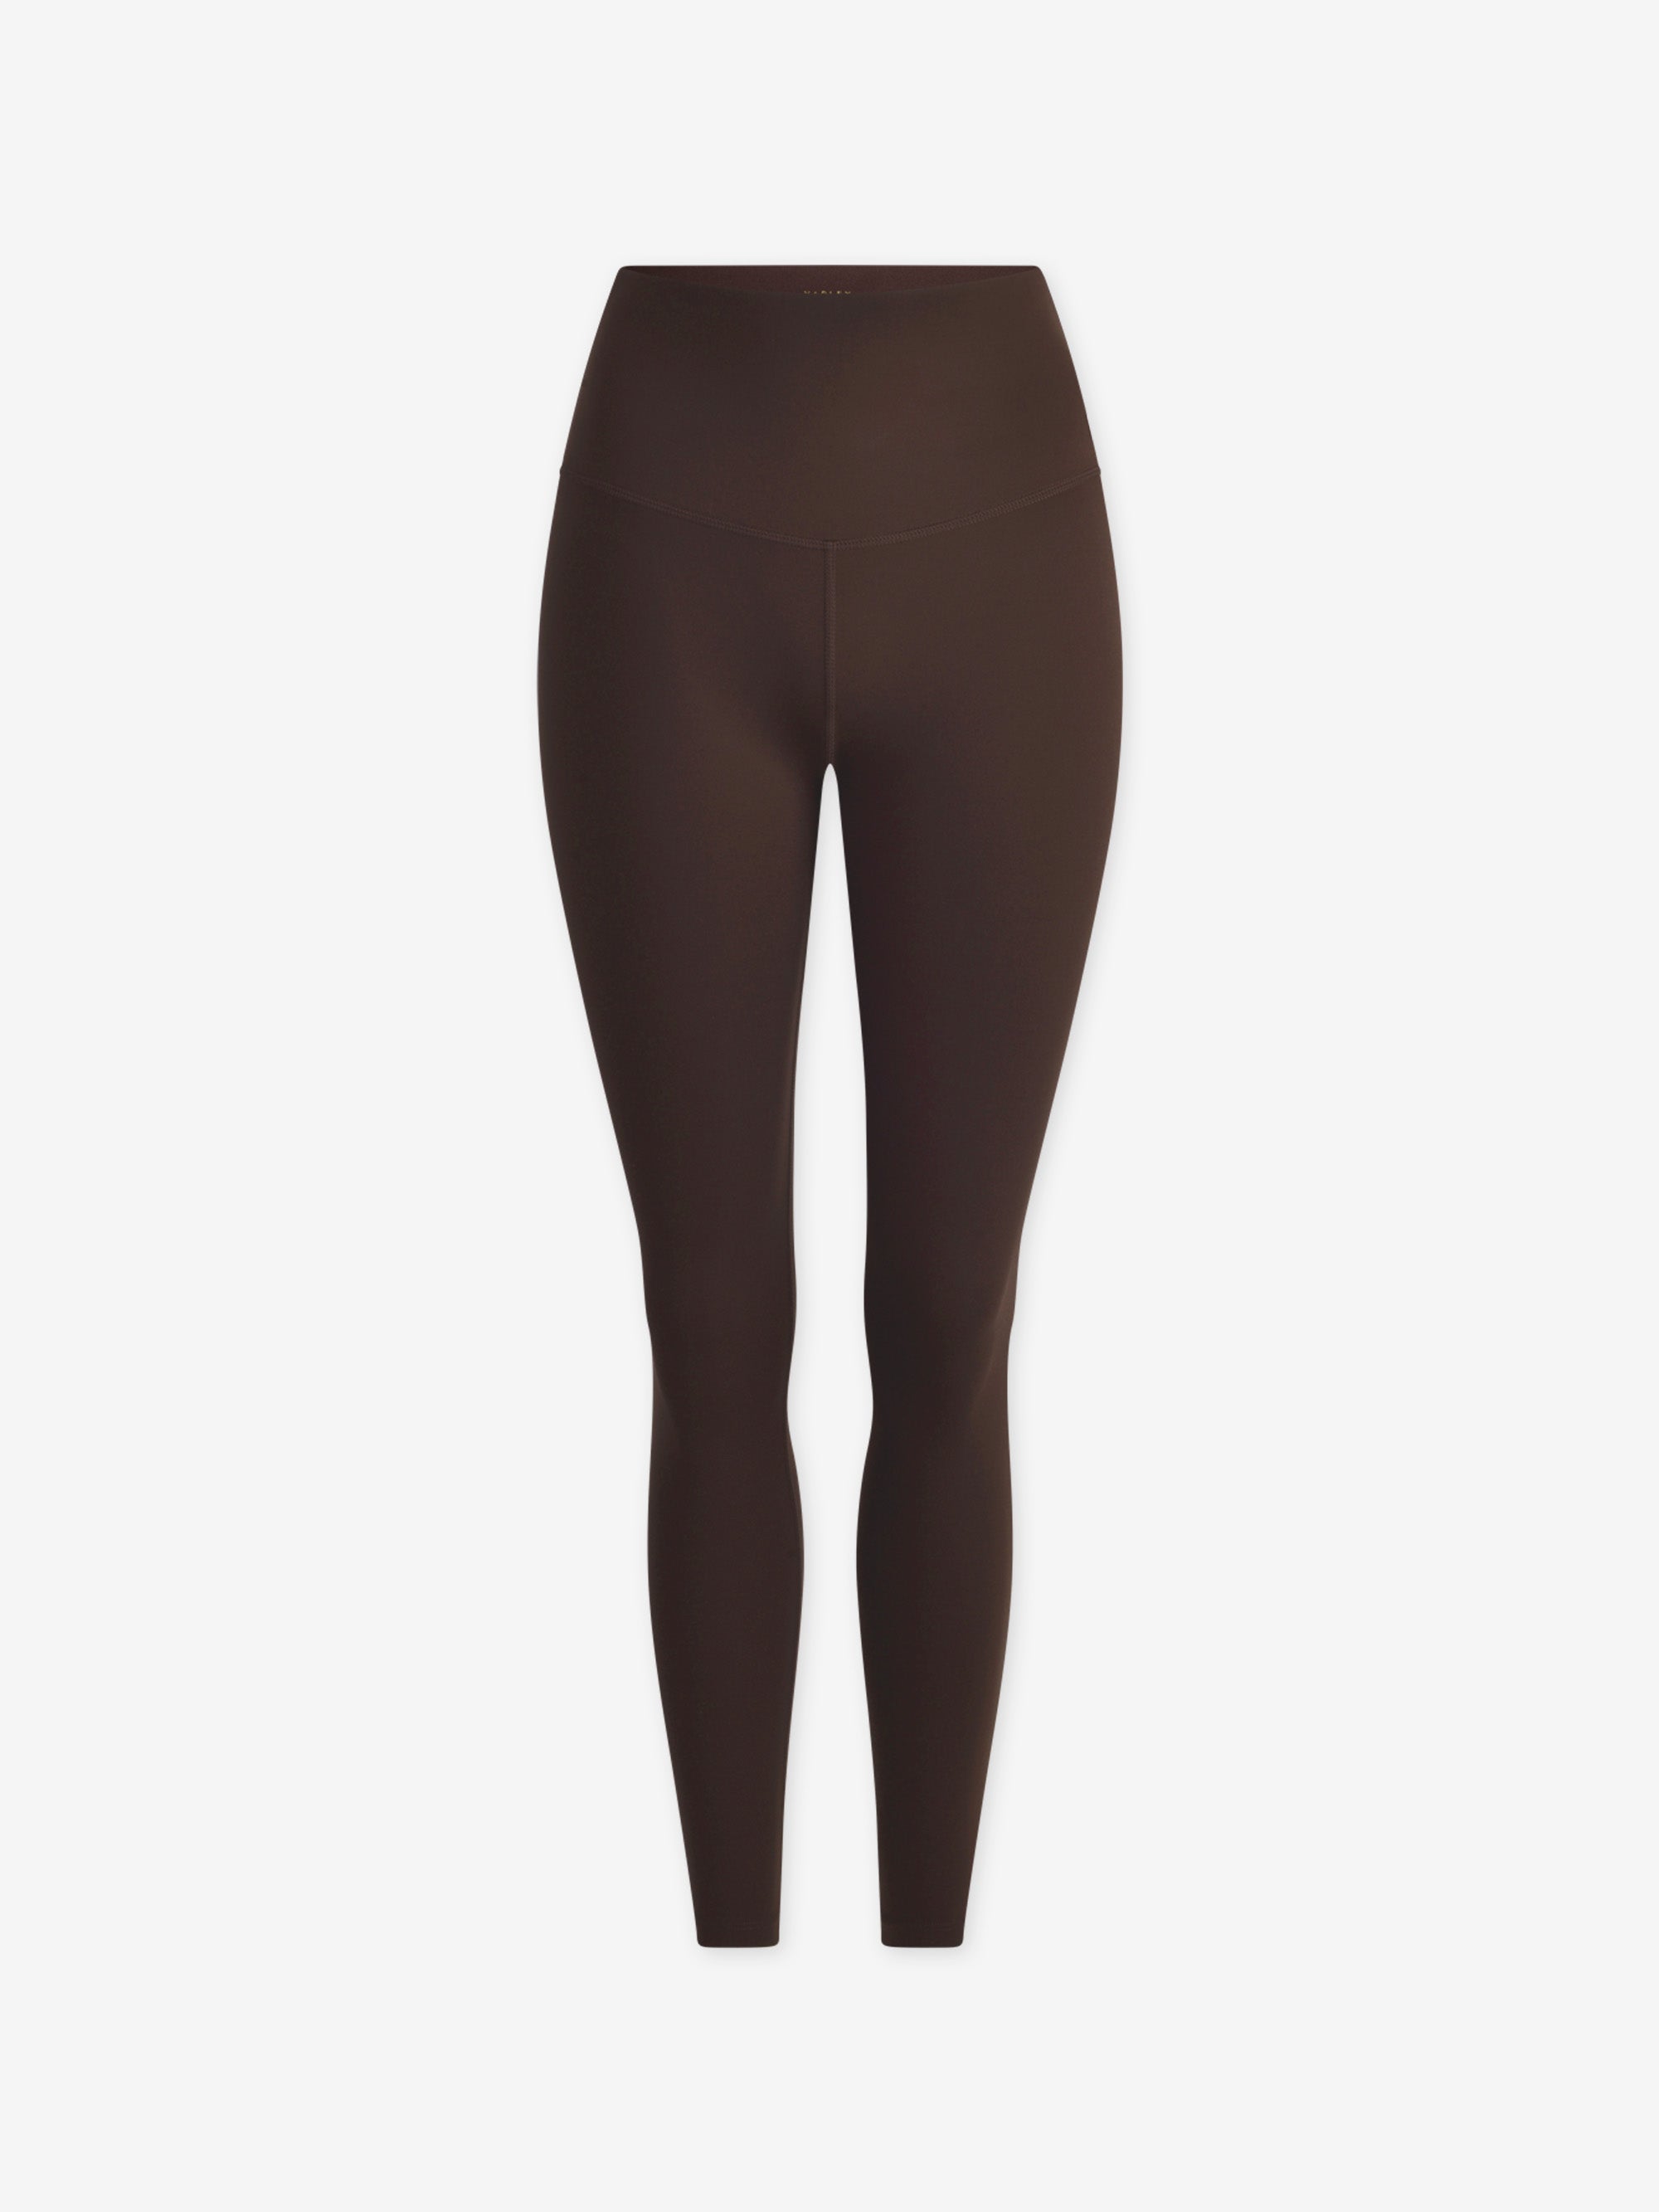 How Much Do Leggings Cost at a Lululemon Outlet? - Playbite